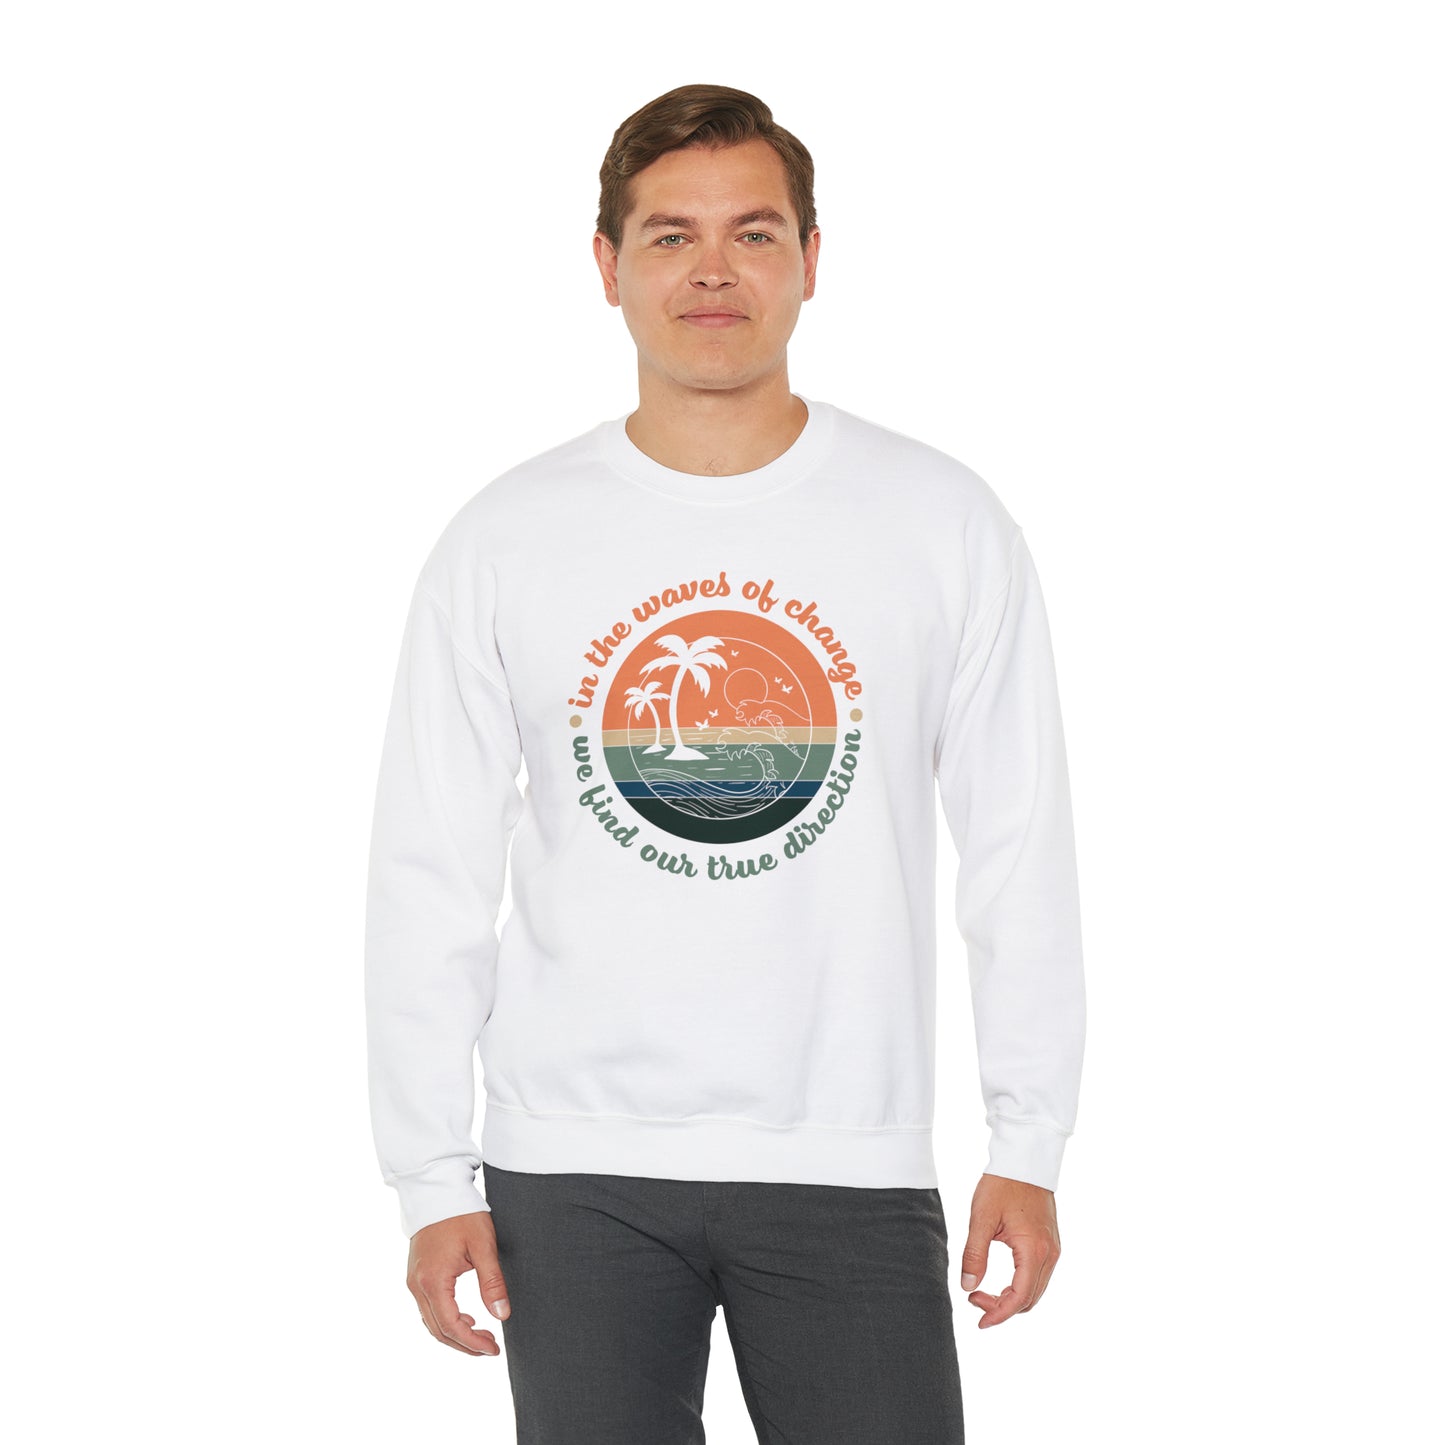 In the Waves of Change We Find Our True Direction Crewneck Sweatshirt